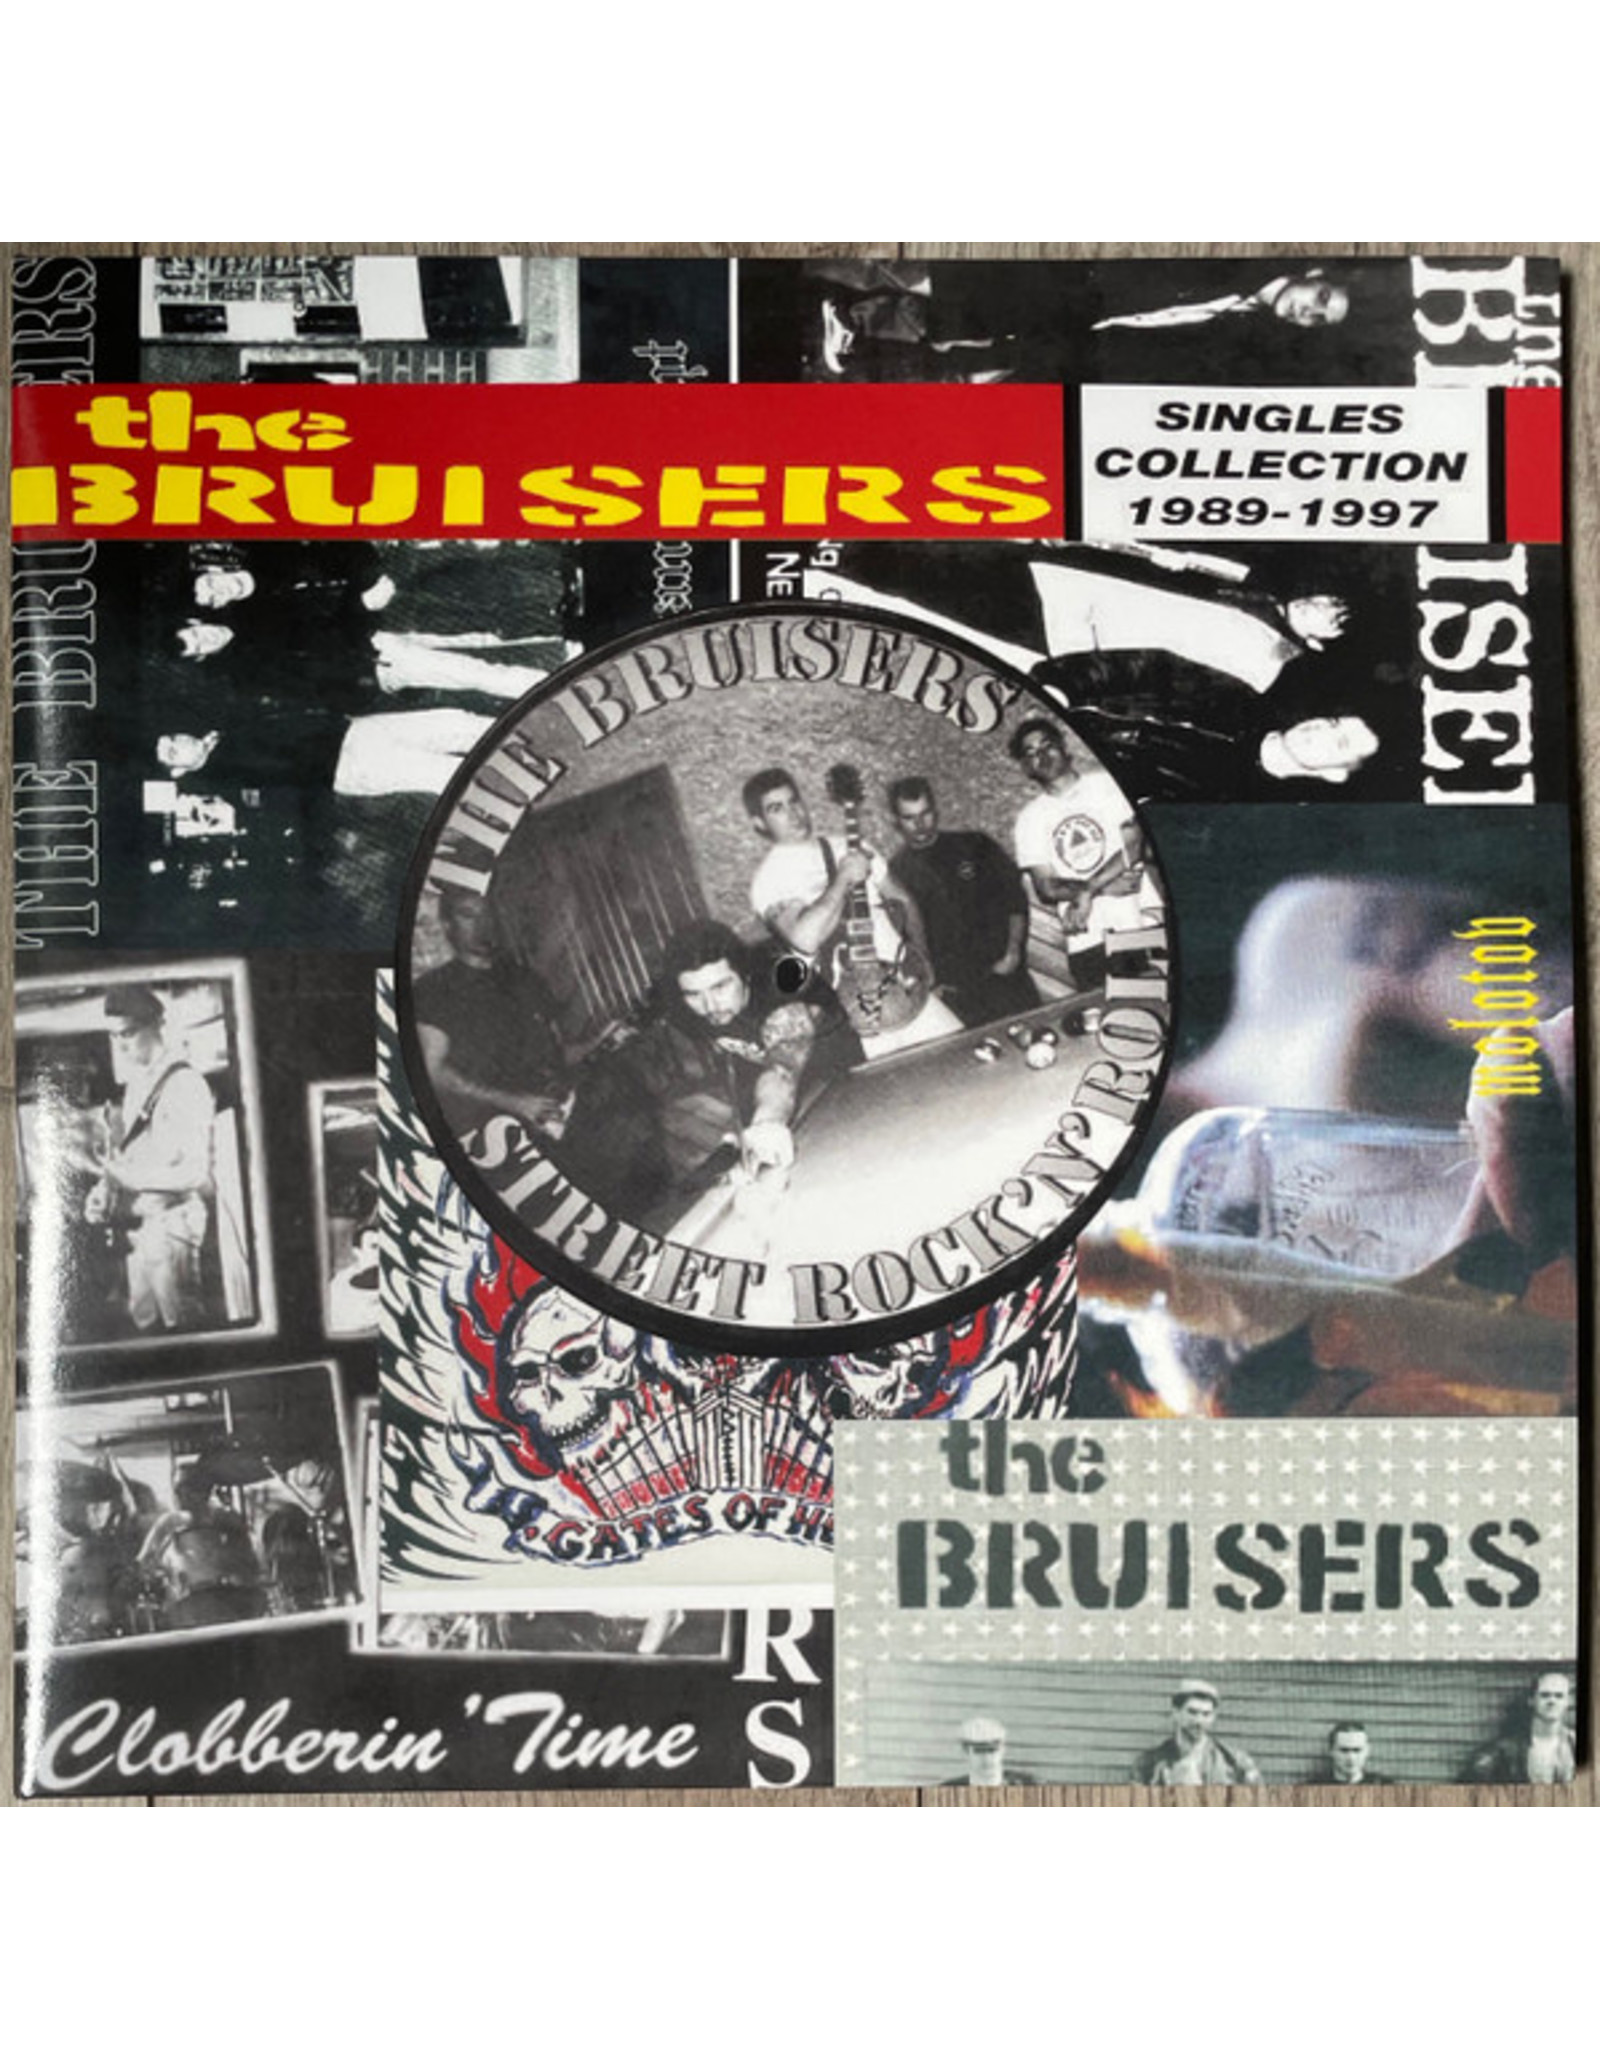 New Vinyl The Bruisers - The Singles Collection 1989-1997 2LP